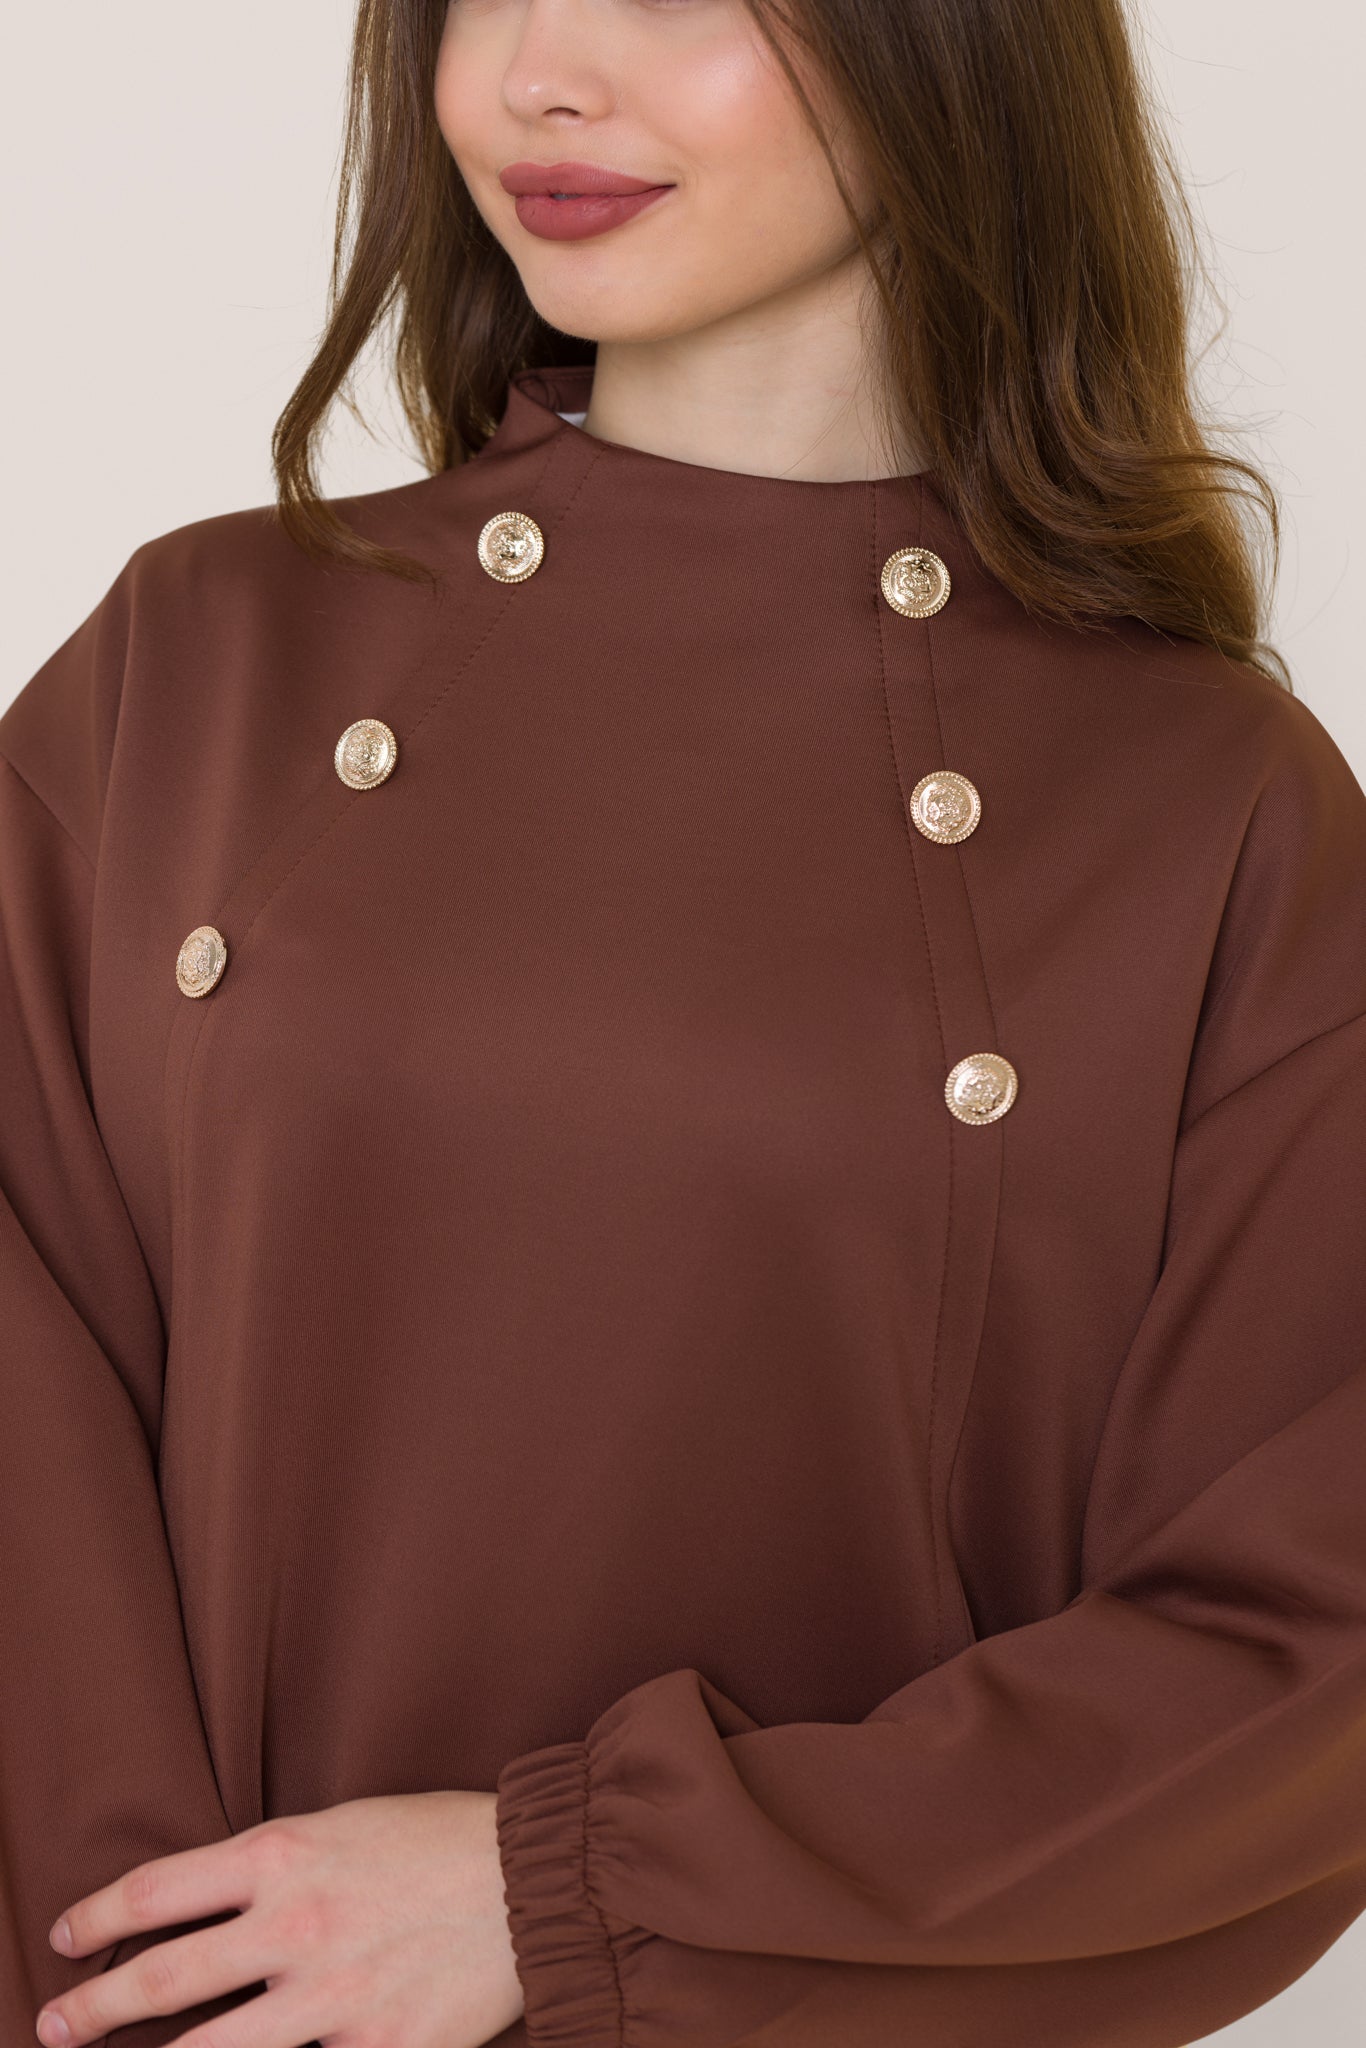 Long Sleeves Golden Button Sweater-Espresso